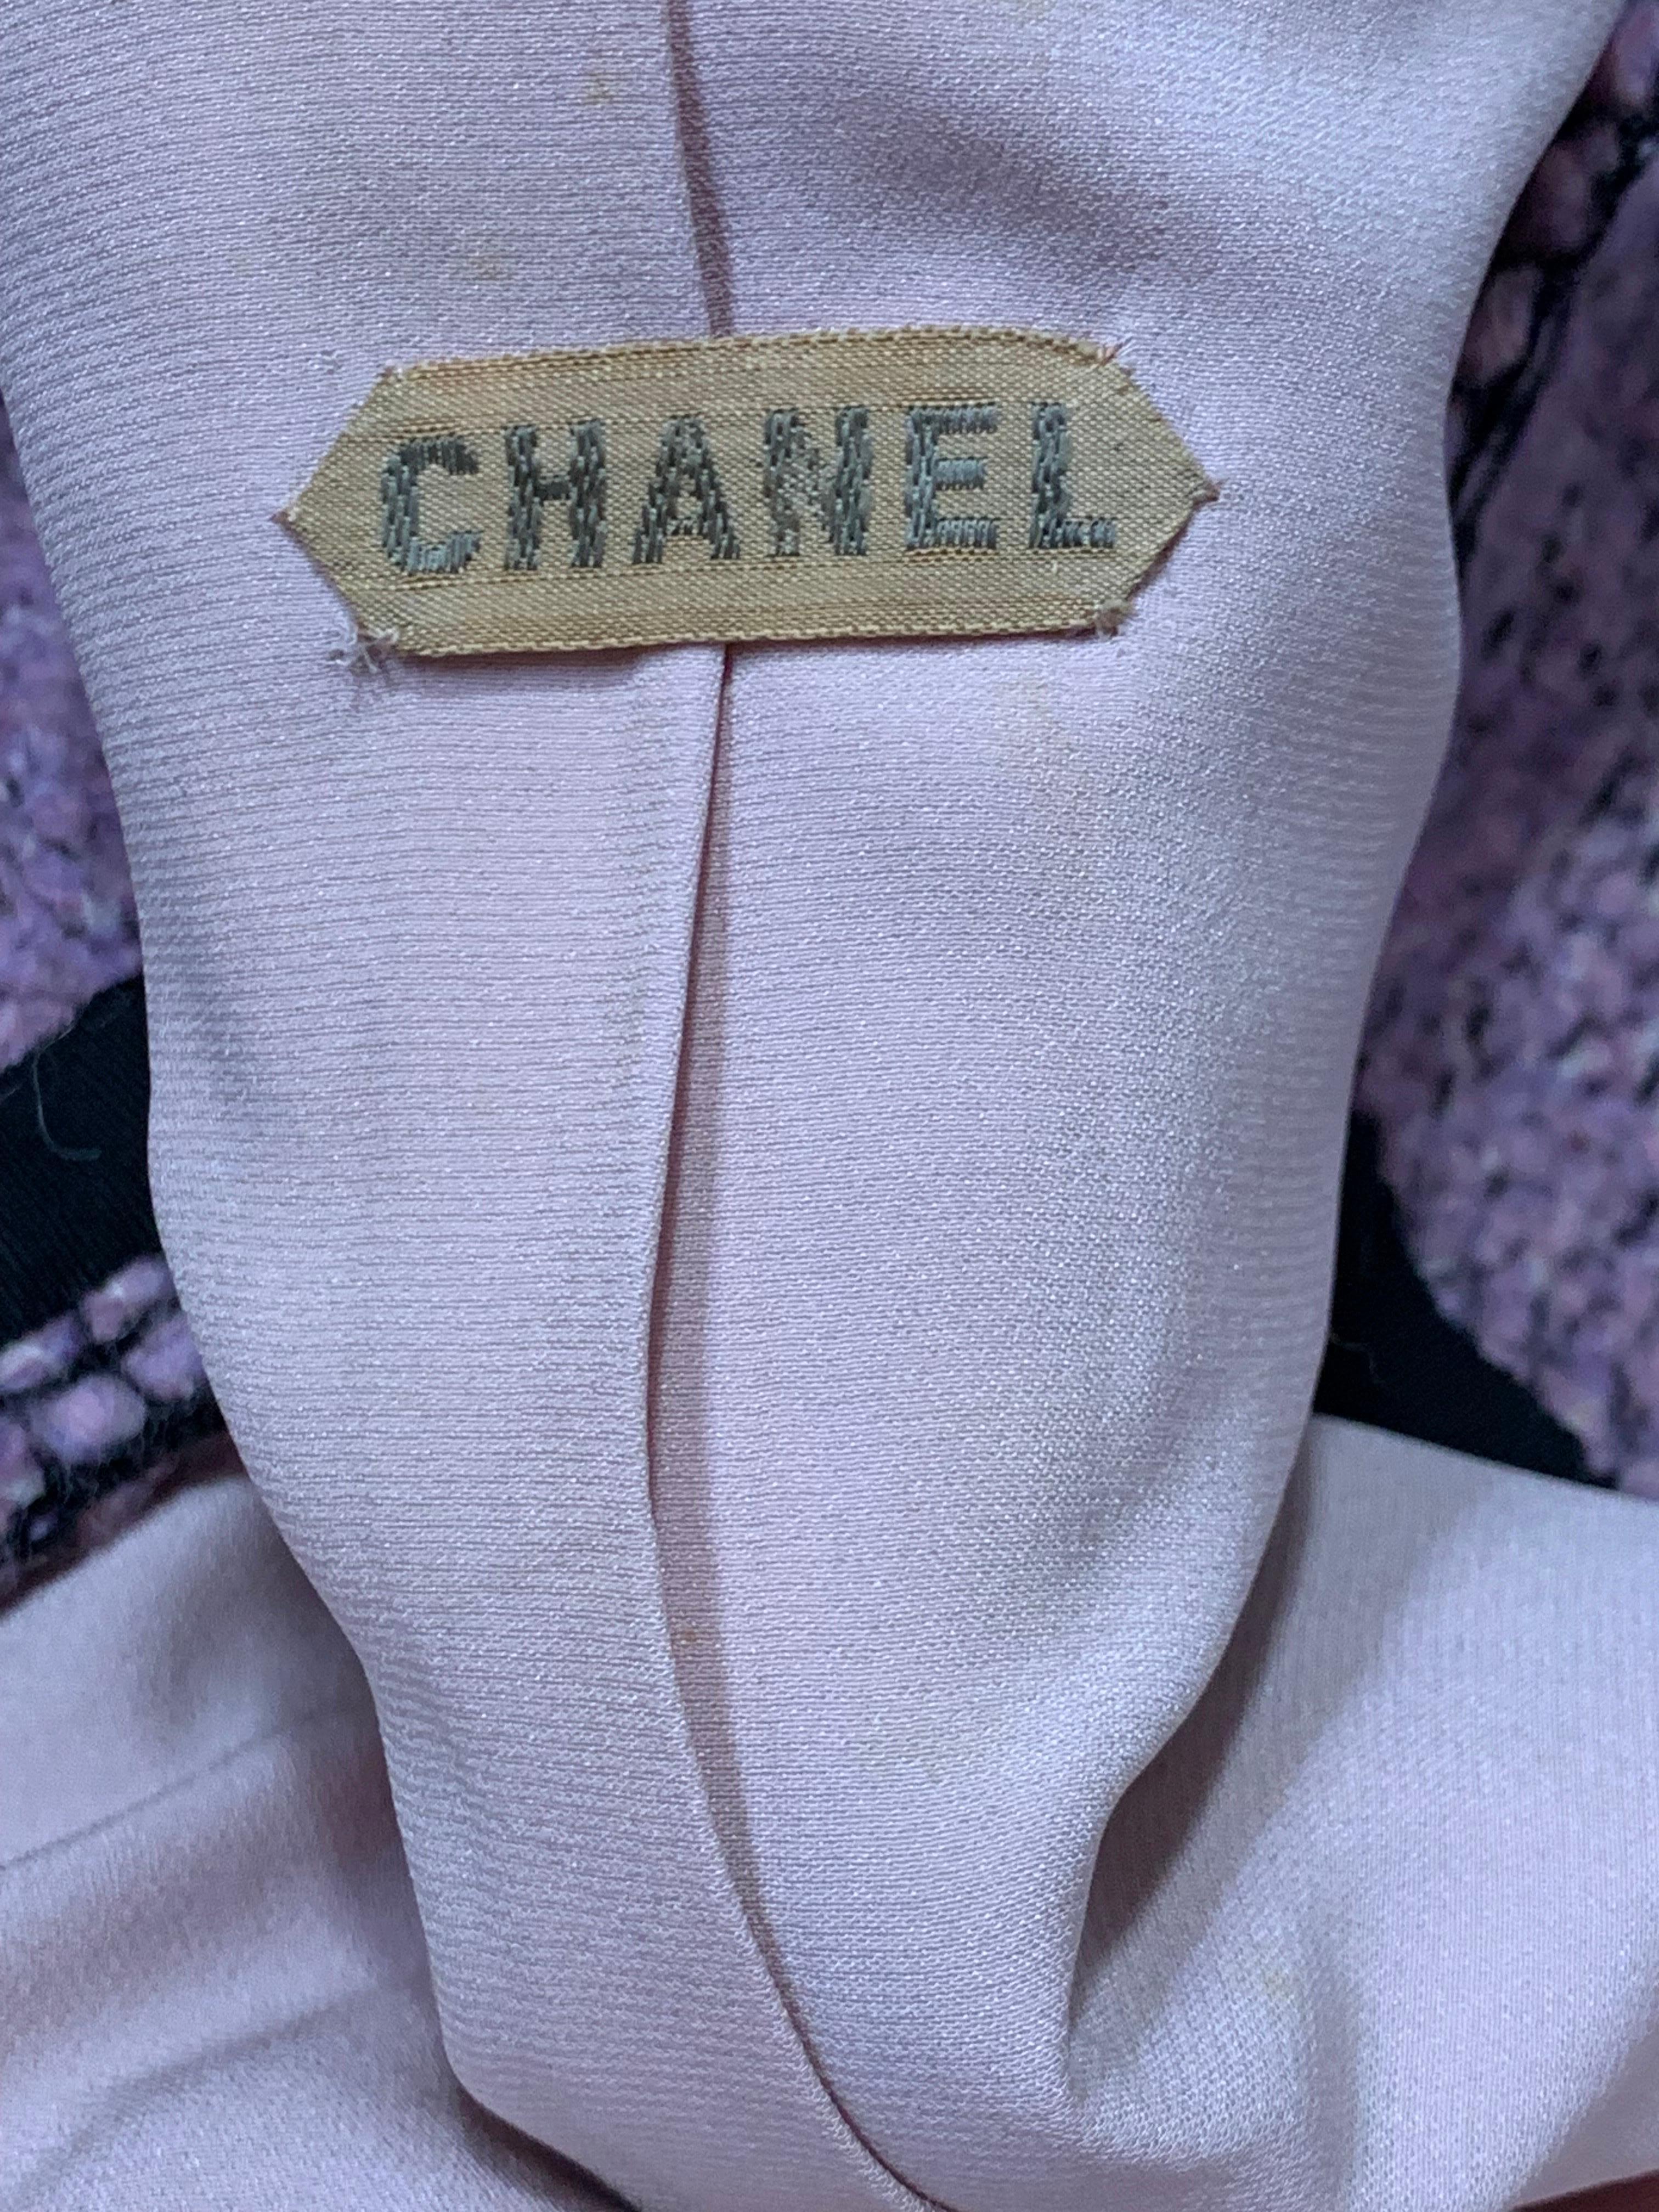 1960 Autumn/Winter Chanel Haute Couture Documented Lavender Tweed Skirt Suit  For Sale 14